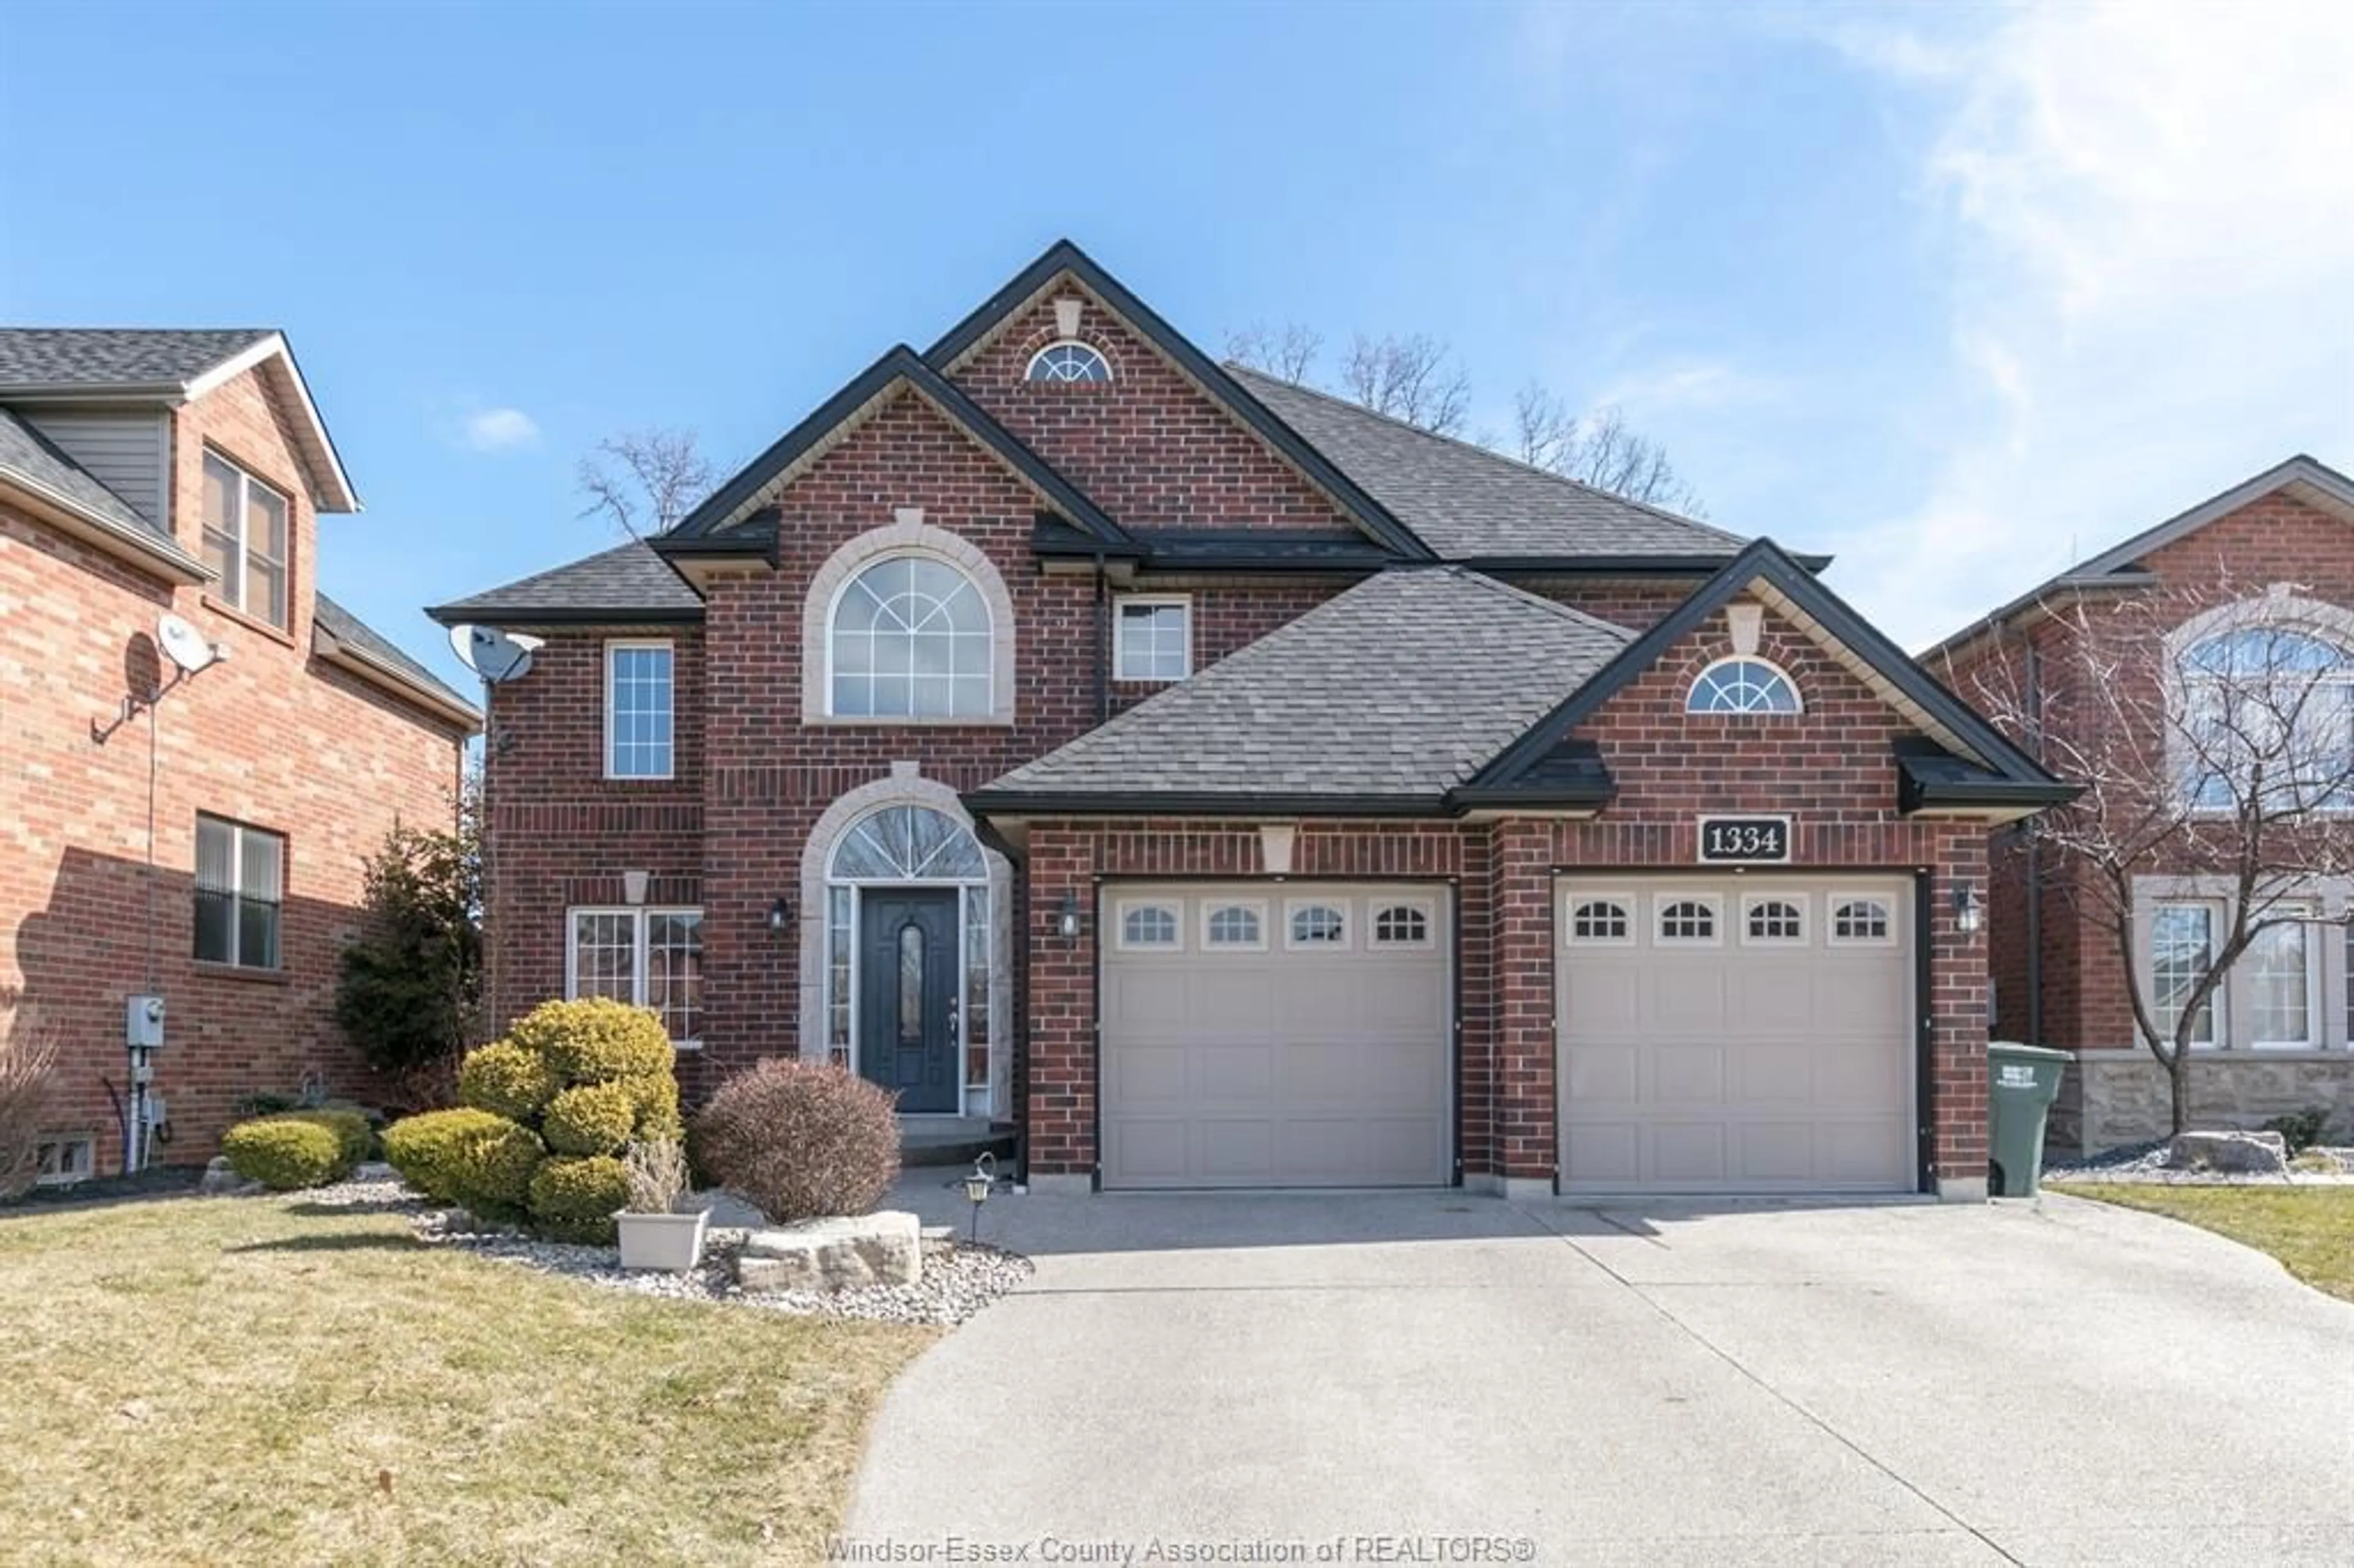 Home with brick exterior material for 1334 LAKEVIEW, Windsor Ontario N8P 1P1